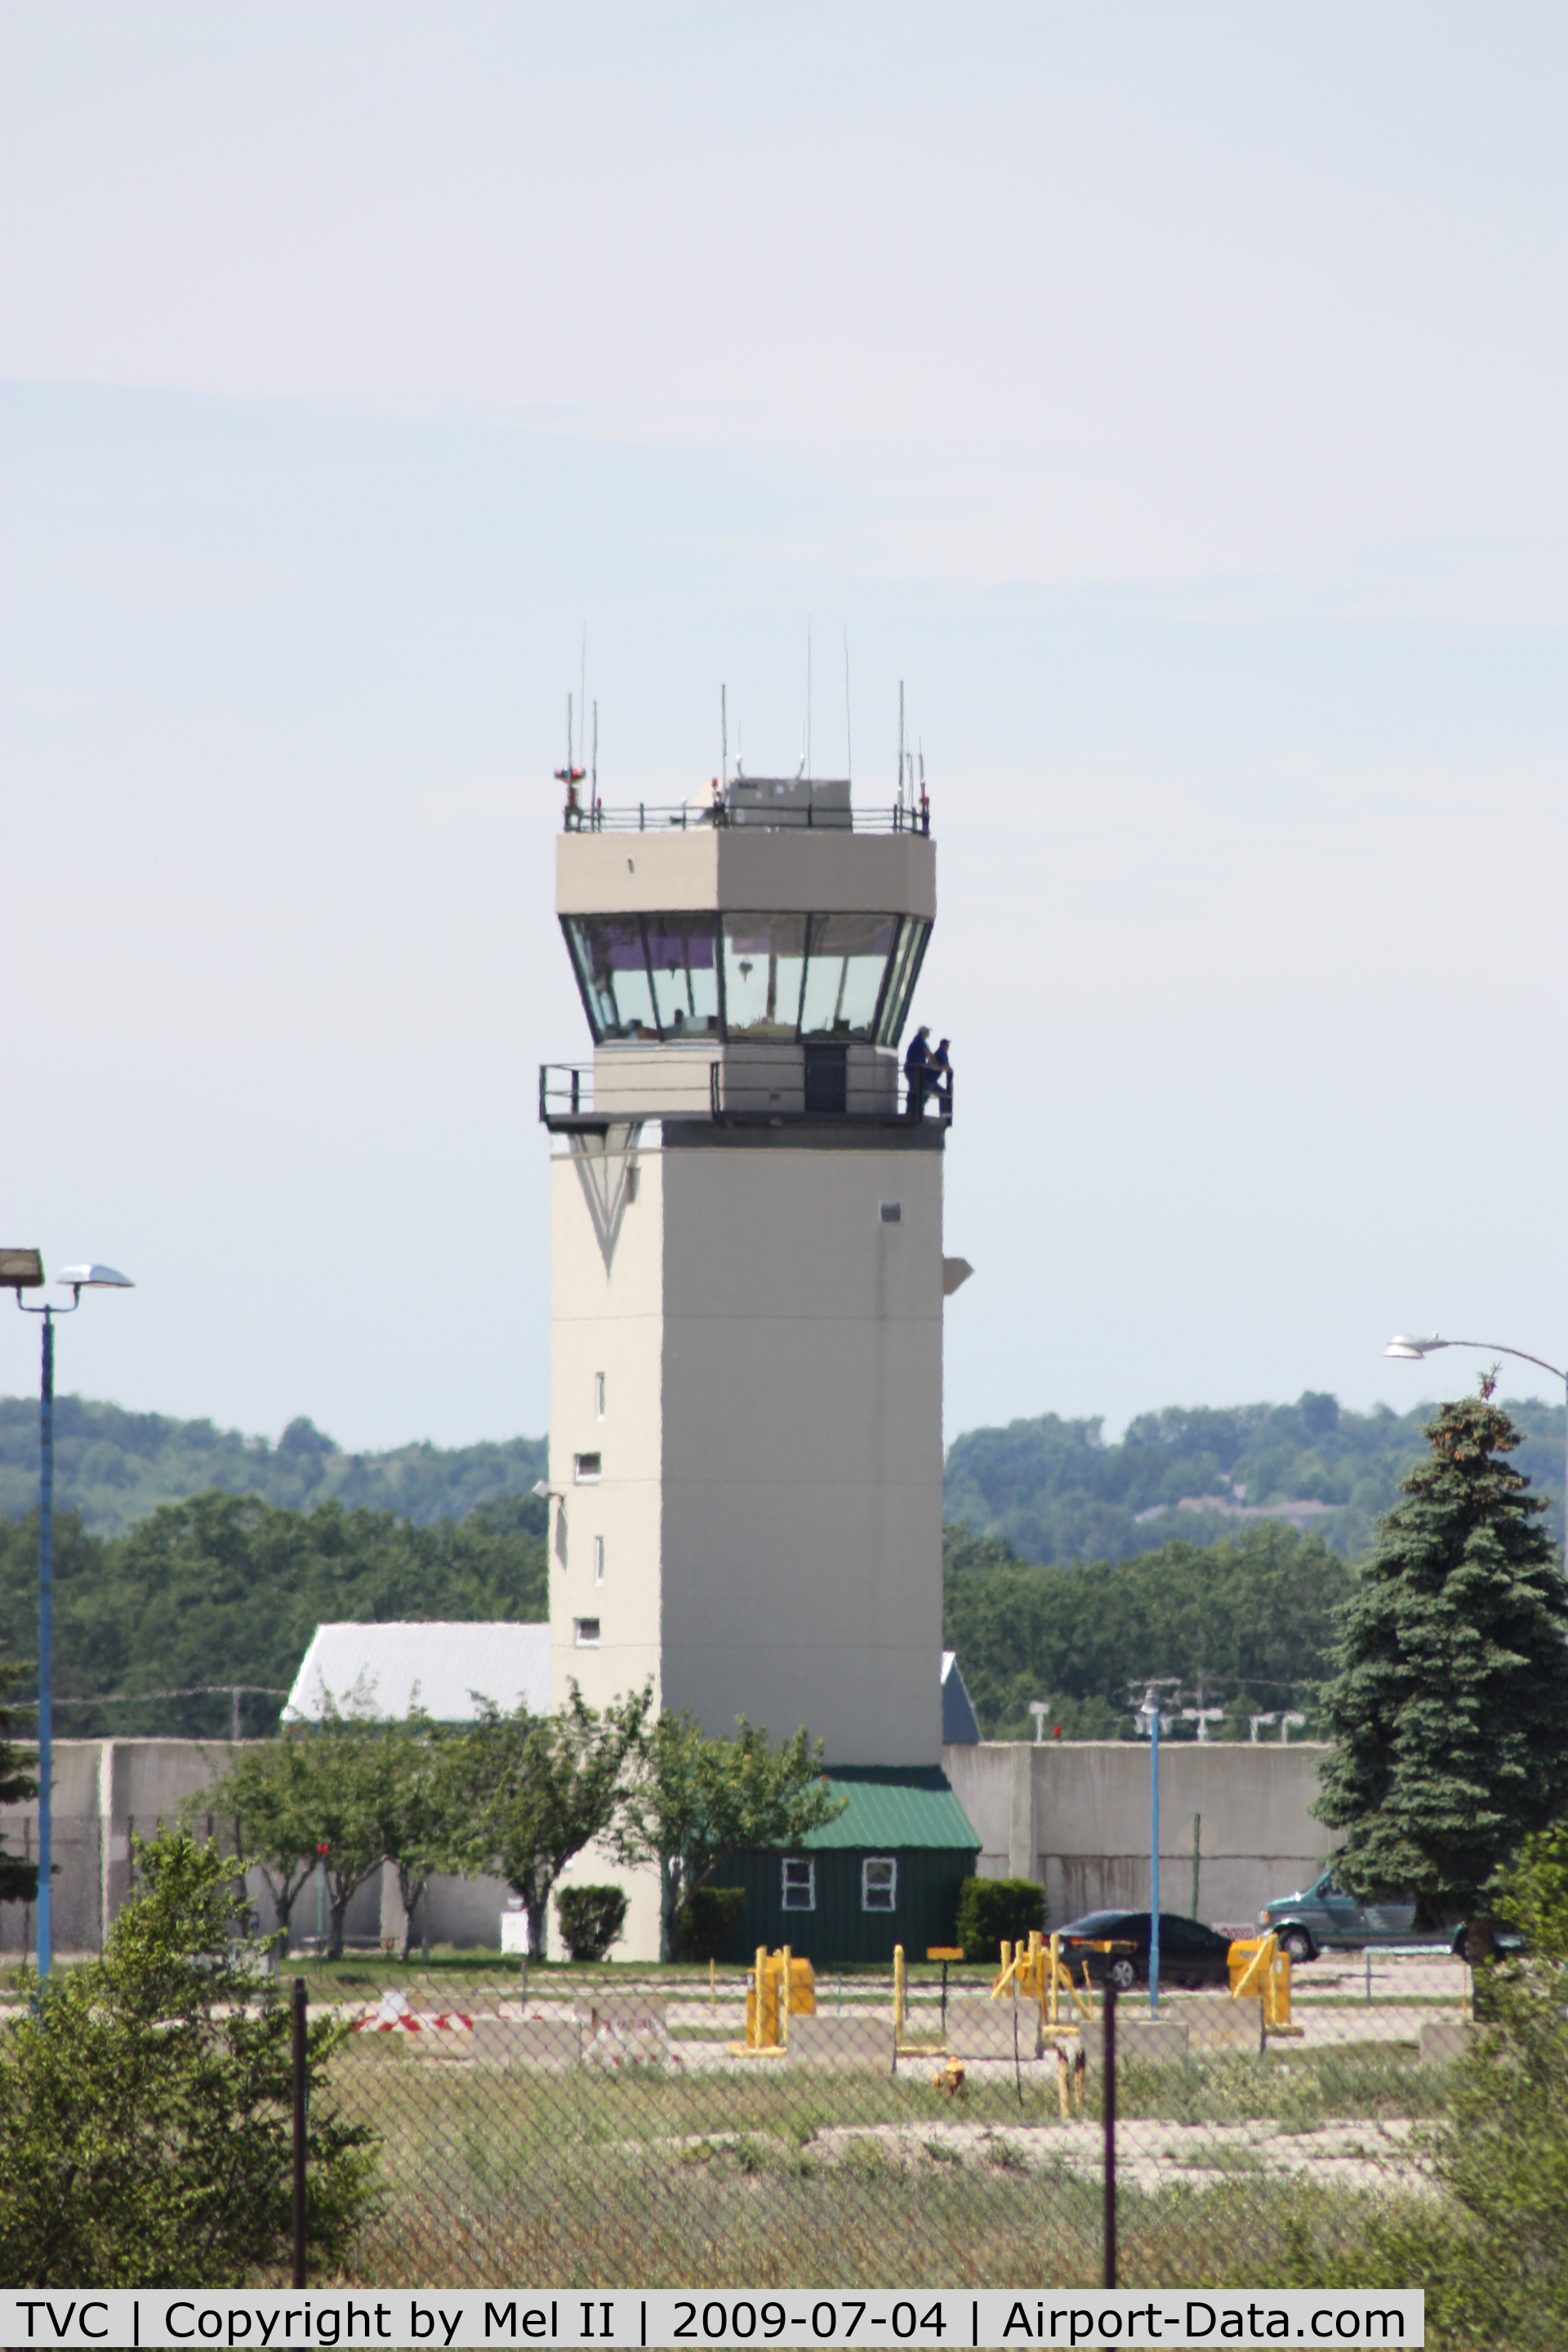 Cherry Capital Airport (TVC) - Tower